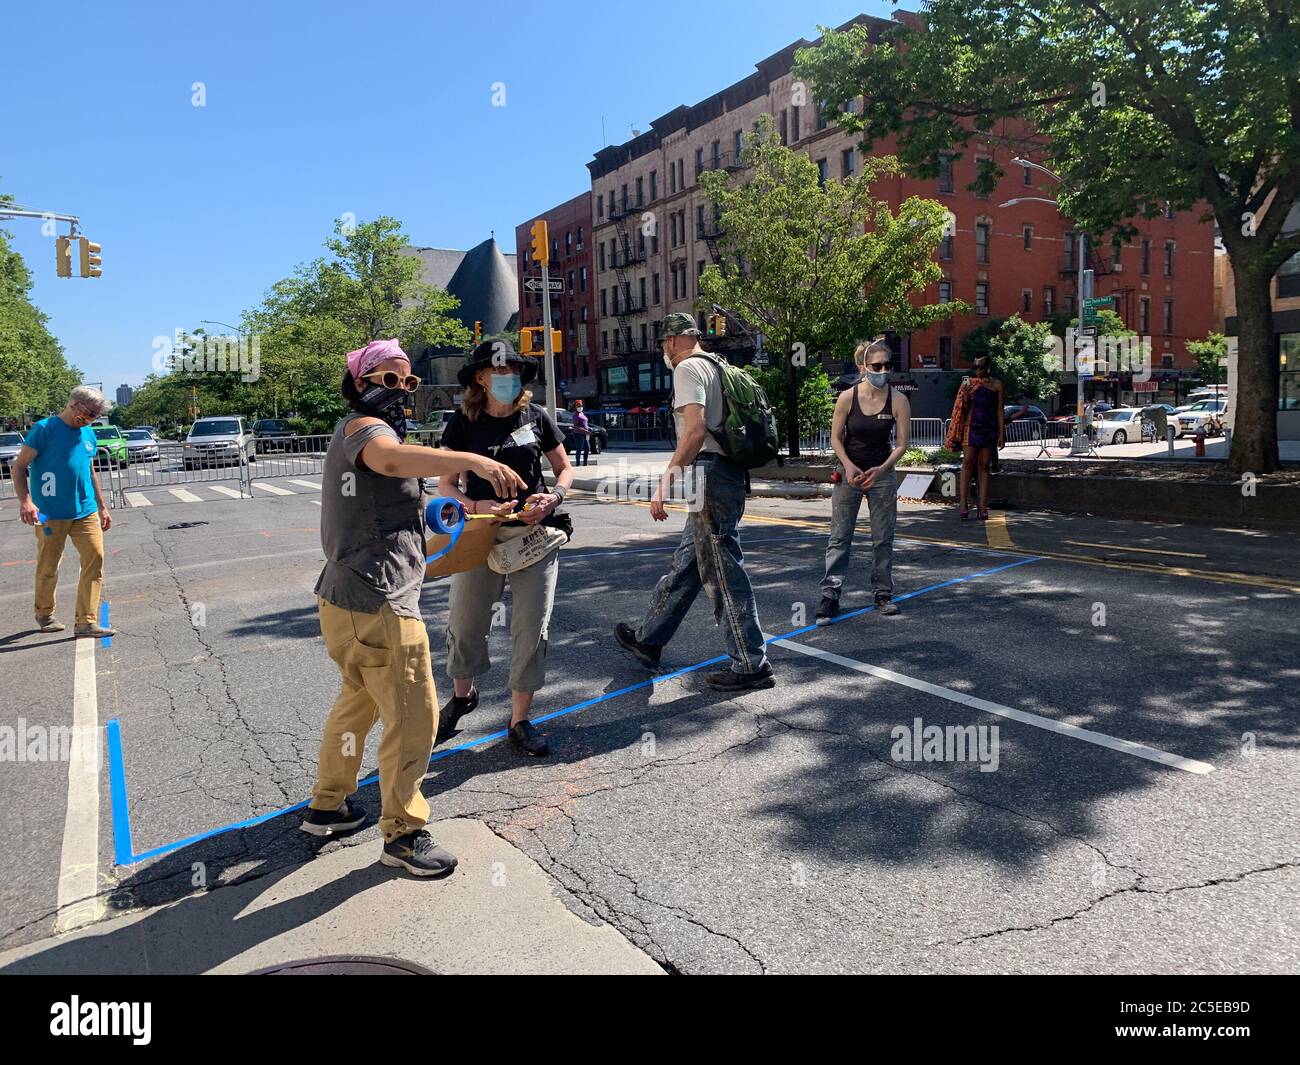 New York, USA. 2nd July, 2020. (NEW) Black lives MatterÃ¢â‚¬â„¢s Mural in Harlem. July 2, 2020, Harlem, New York, USA: Adam Clayton Powell jr Avenue with W 125 to 127 streets, Harlem is closed to the public from today July 2nd till July 5th for the making of Black lives matters mural . They are protesting against the police murder of George Floyd in Minneapolis and police brutality on blacks .Credit : Niyi Fote/Thenews2 Credit: Niyi Fote/TheNEWS2/ZUMA Wire/Alamy Live News Stock Photo